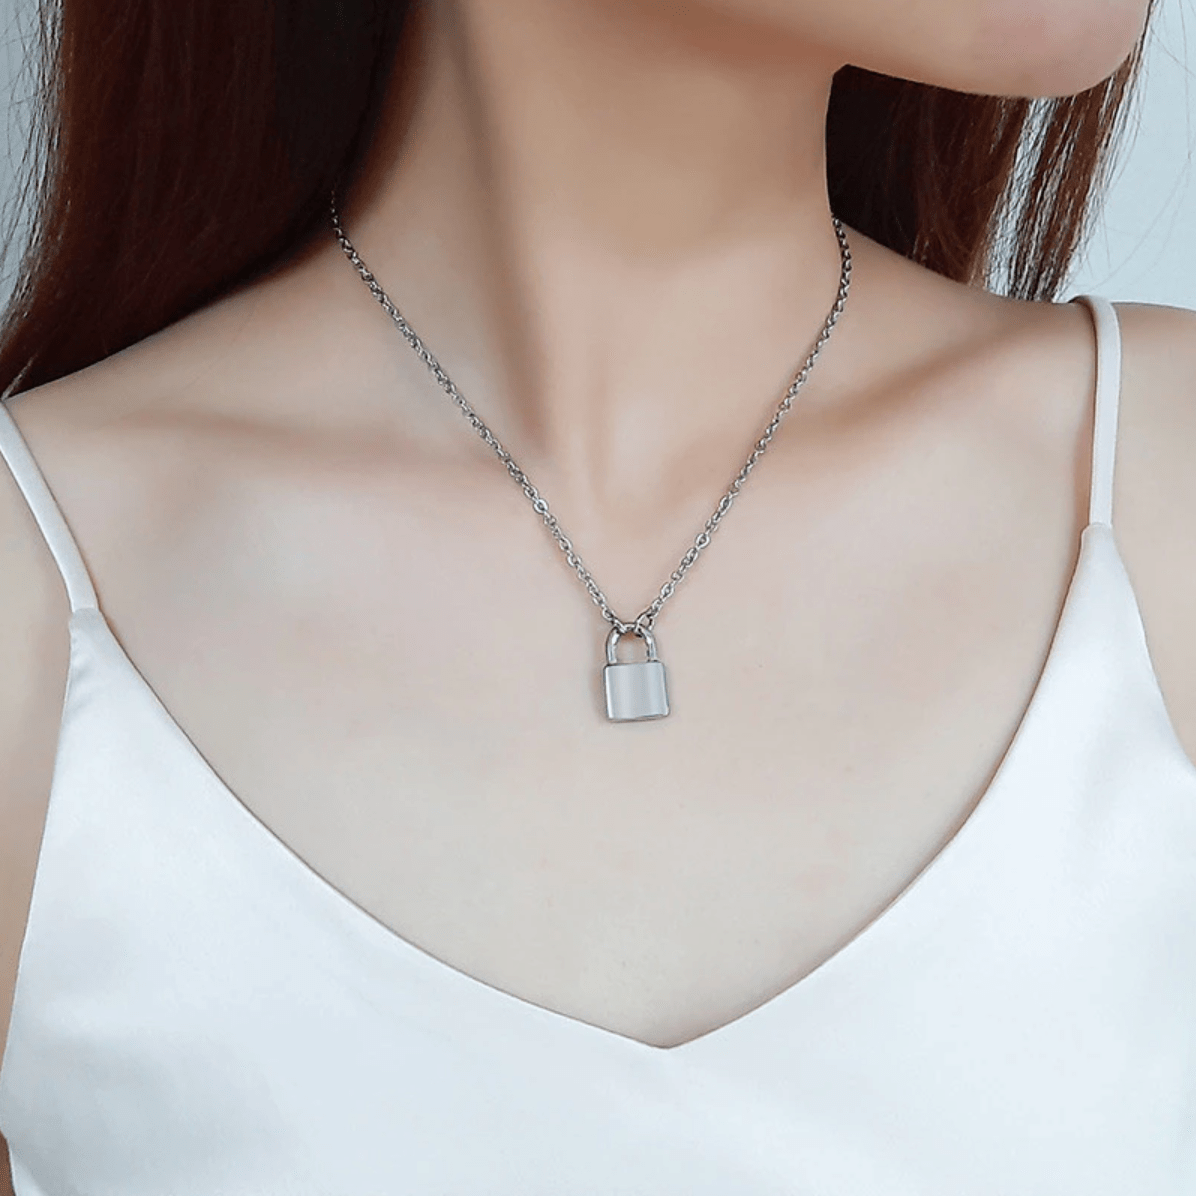 Opes Robur SILVER DAINTY PADLOCK NECKLACE